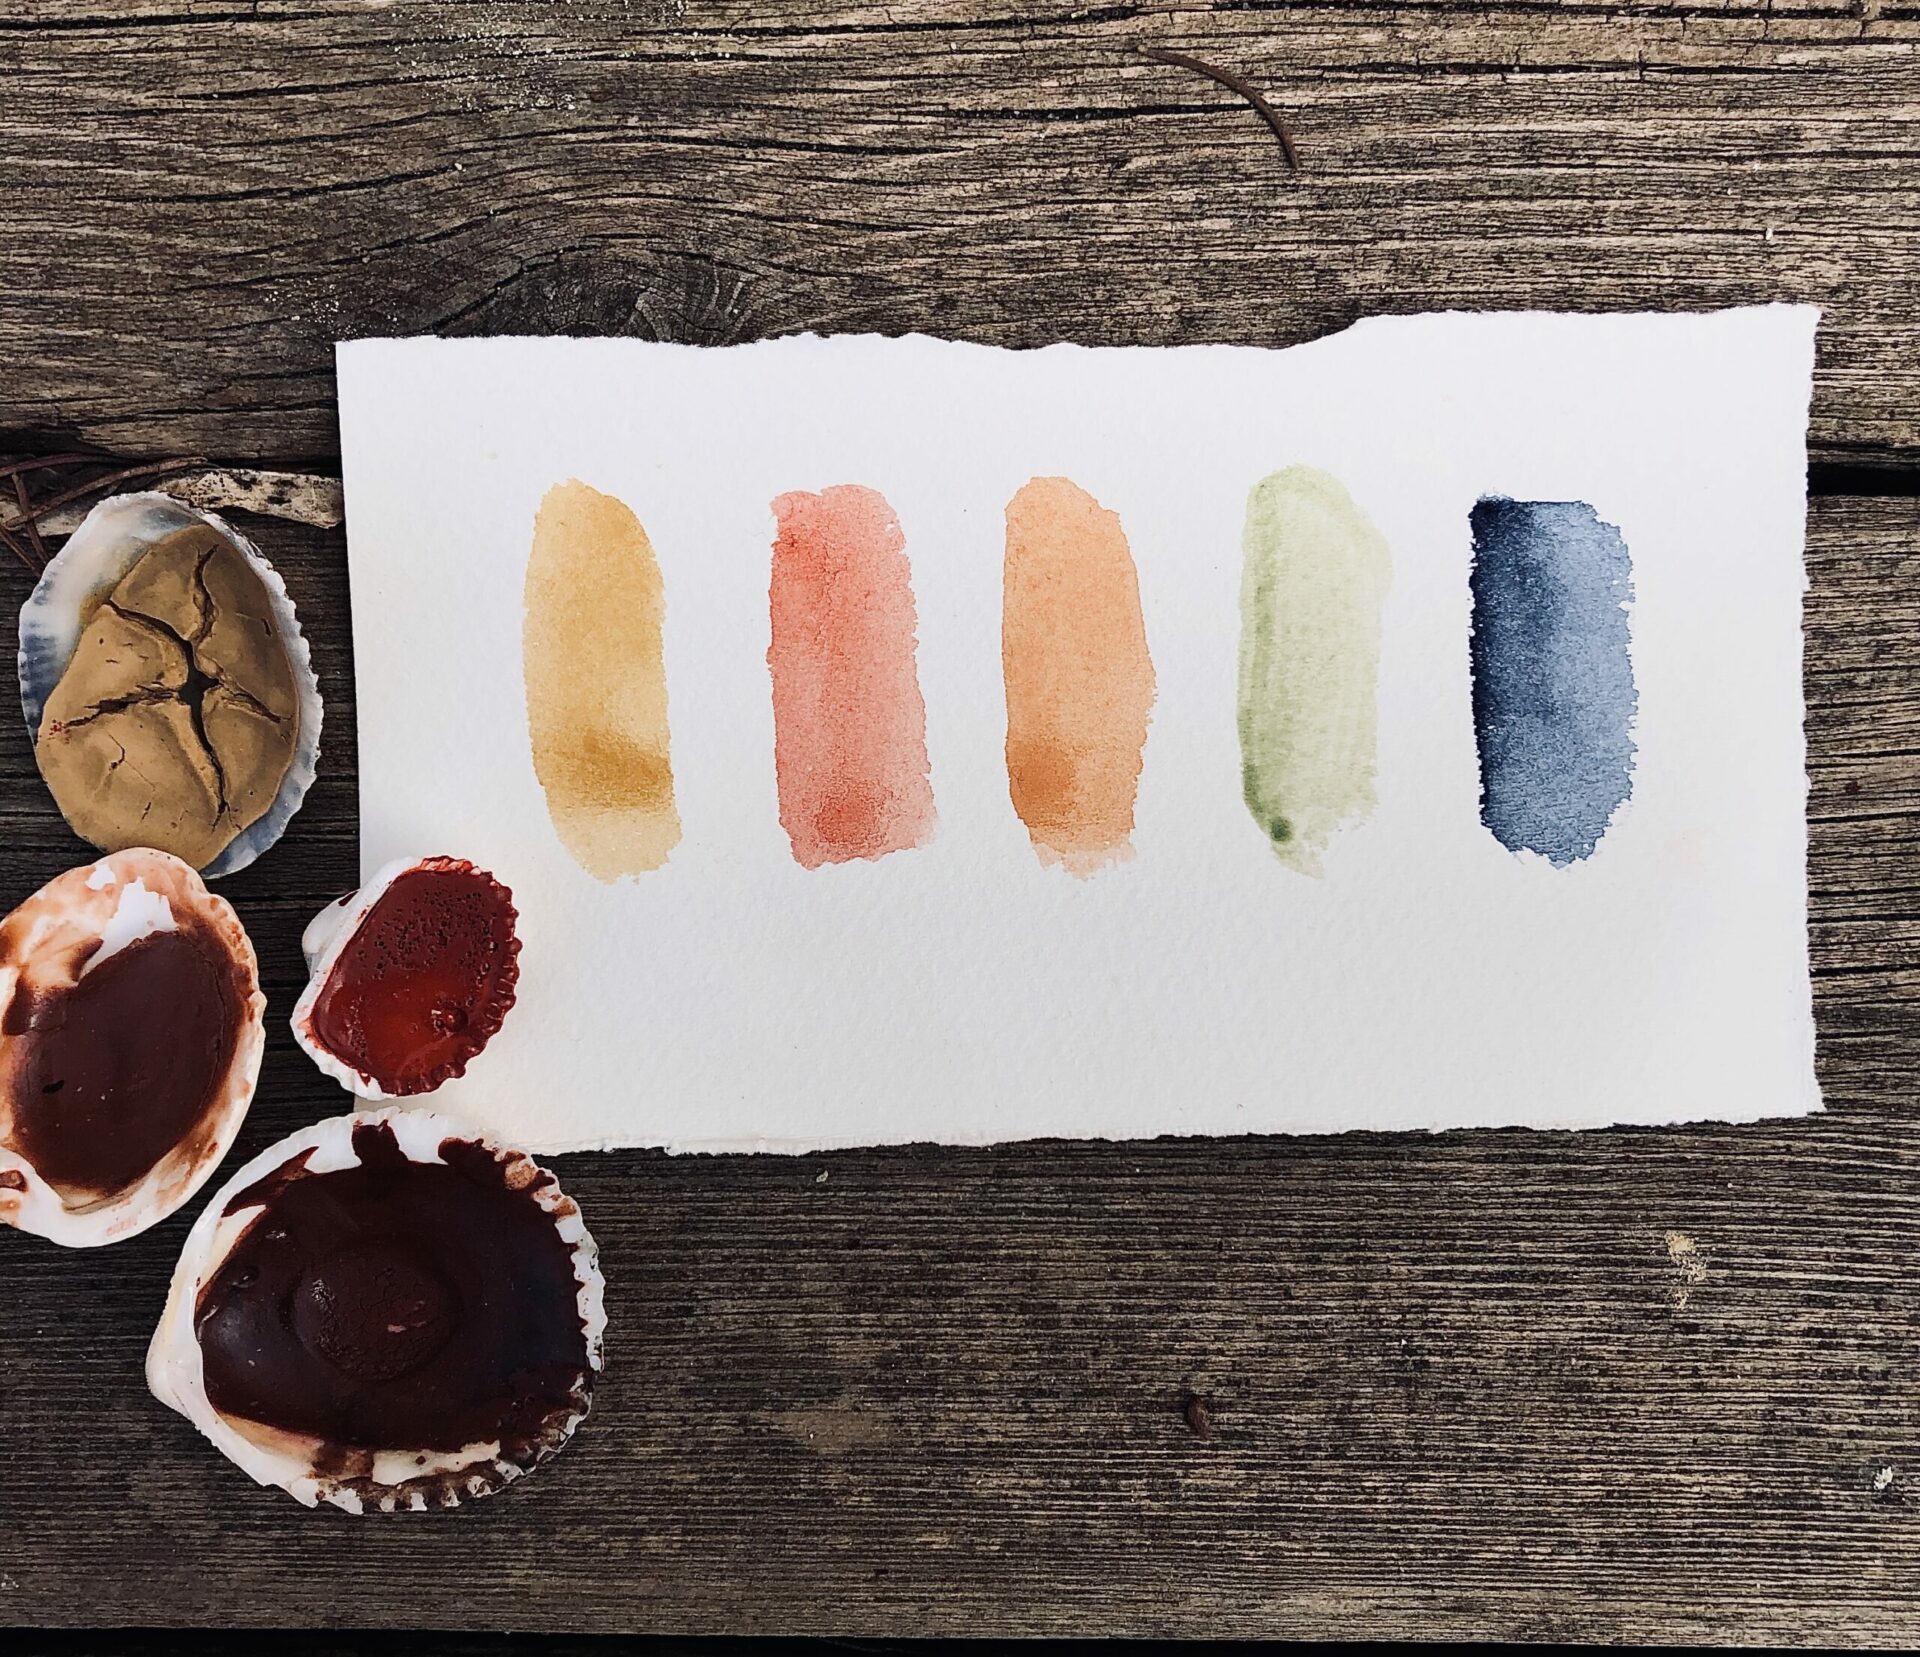 How to make watercolor paint: handmade watercolors - Lost in Colours